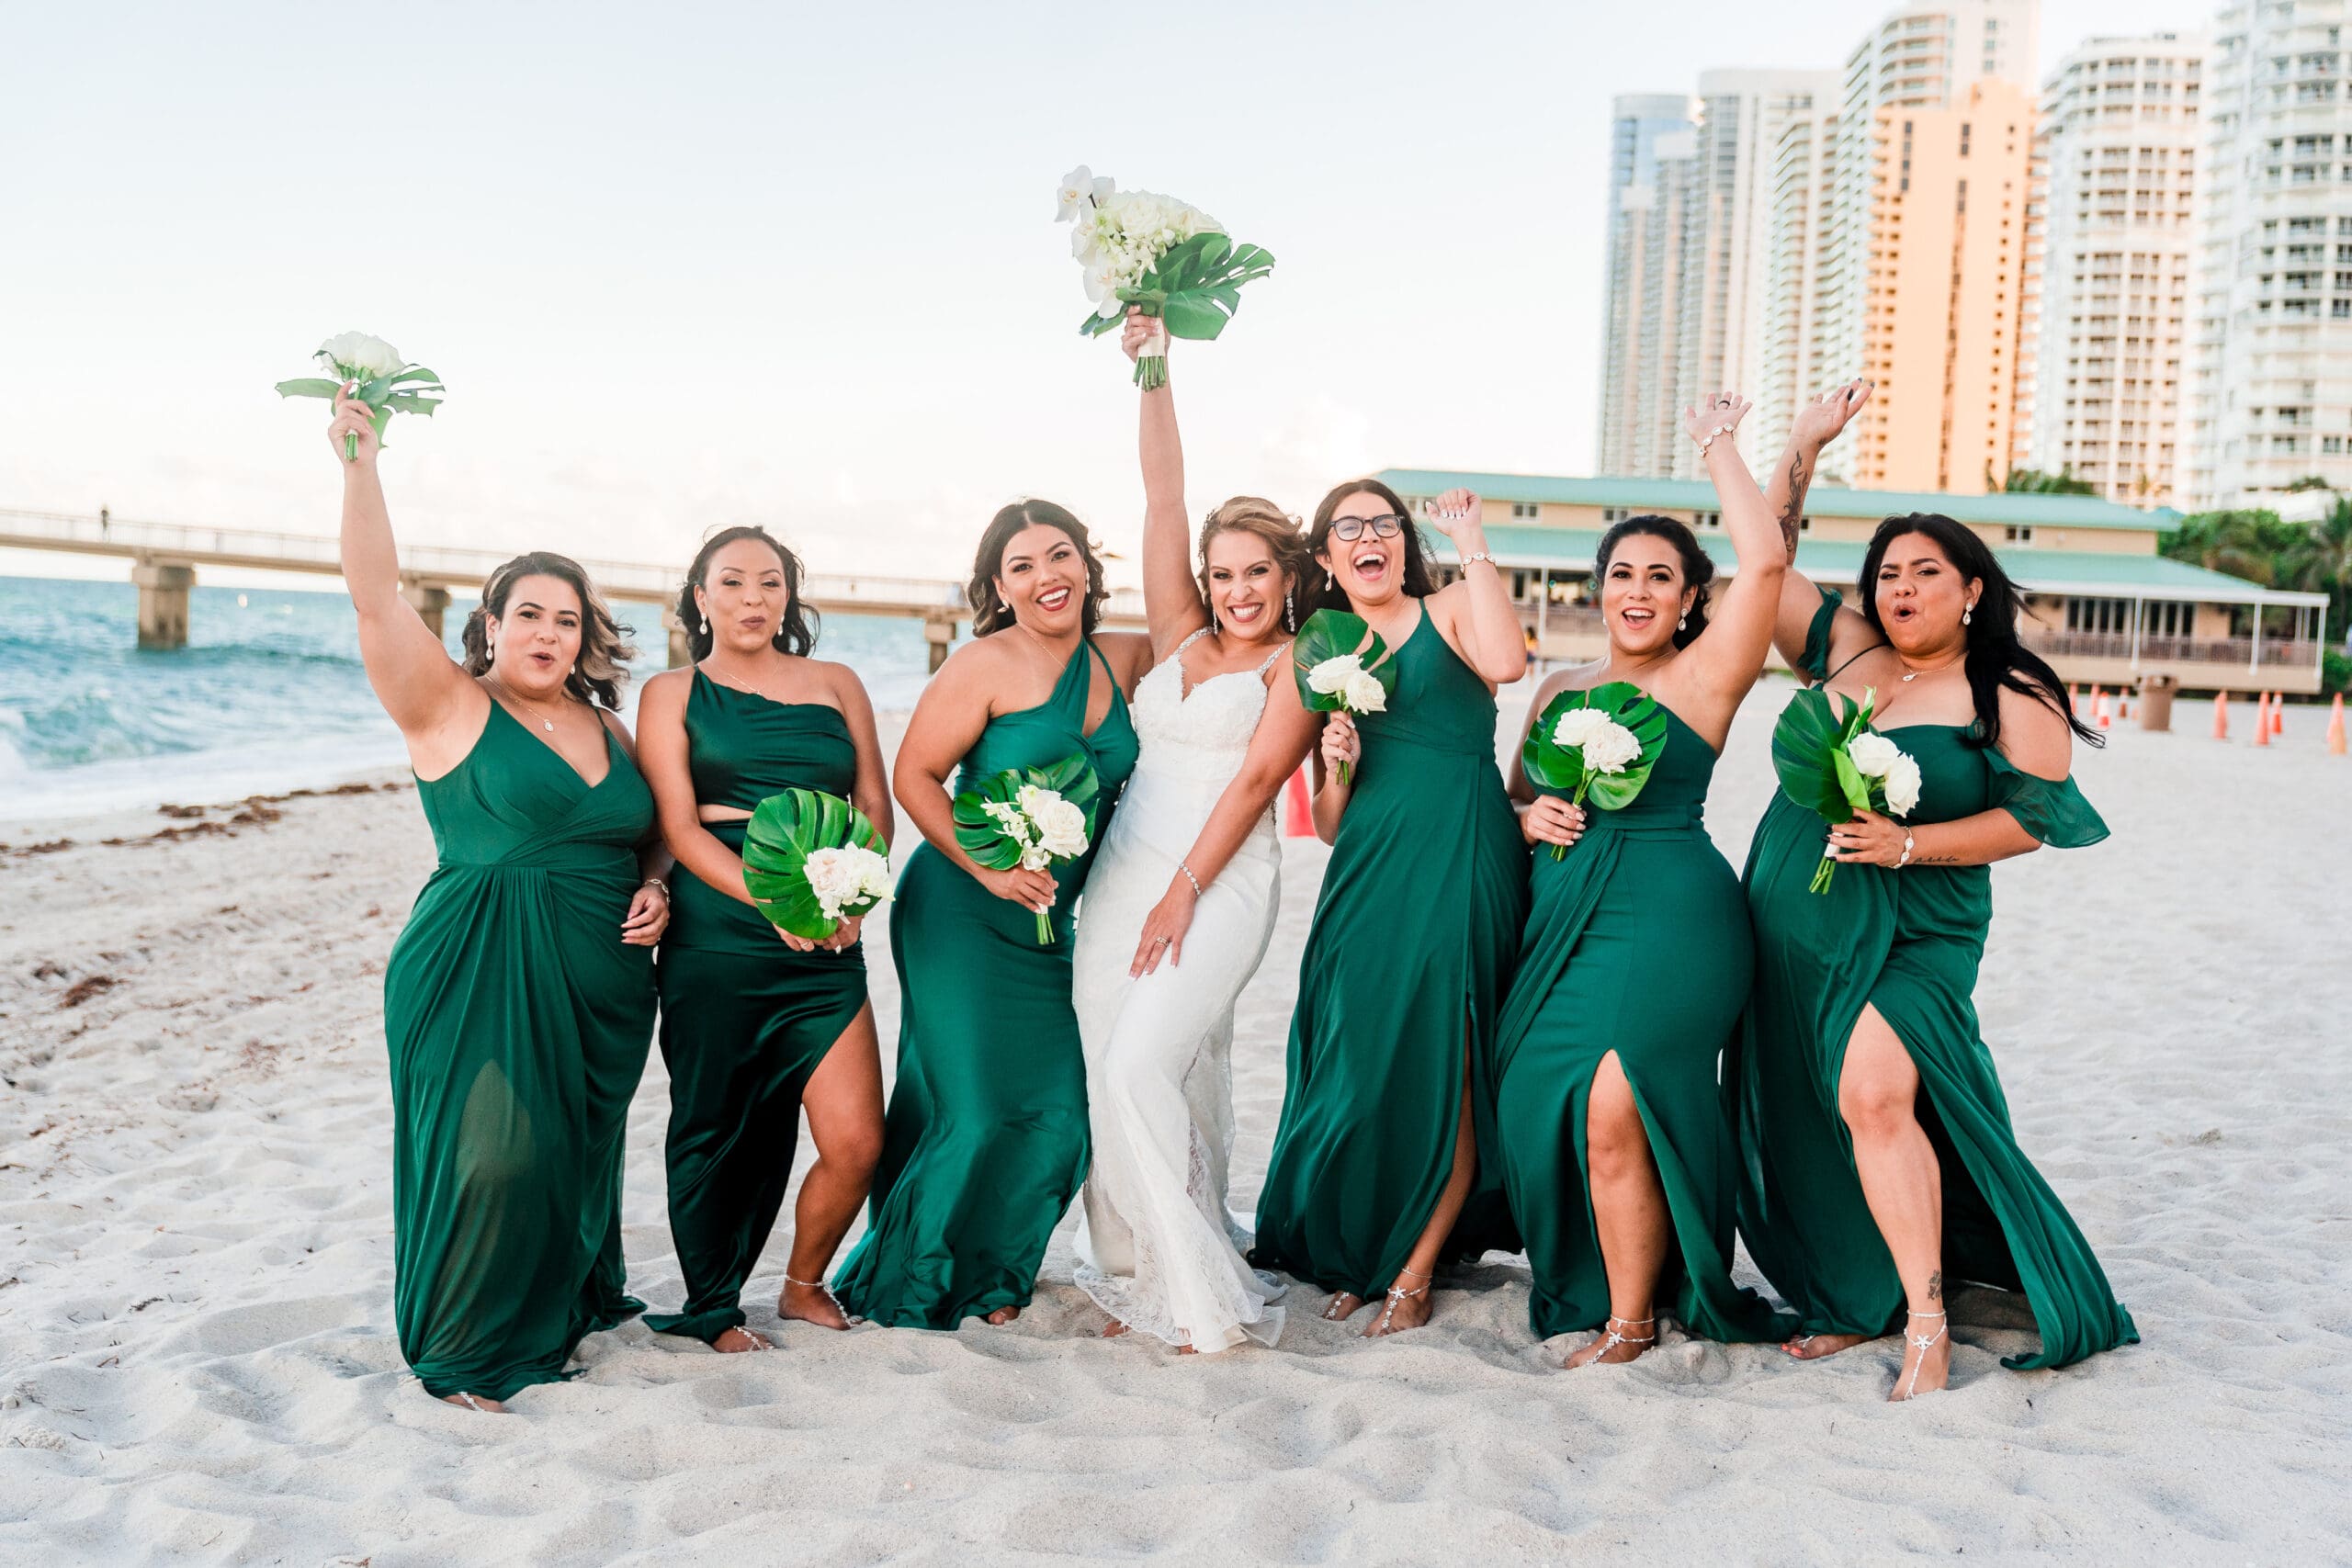 Beach wedding joy: Bride and bridesmaids stand on the sand, cheering and smiling with raised arms in celebration of the beautiful beach wedding